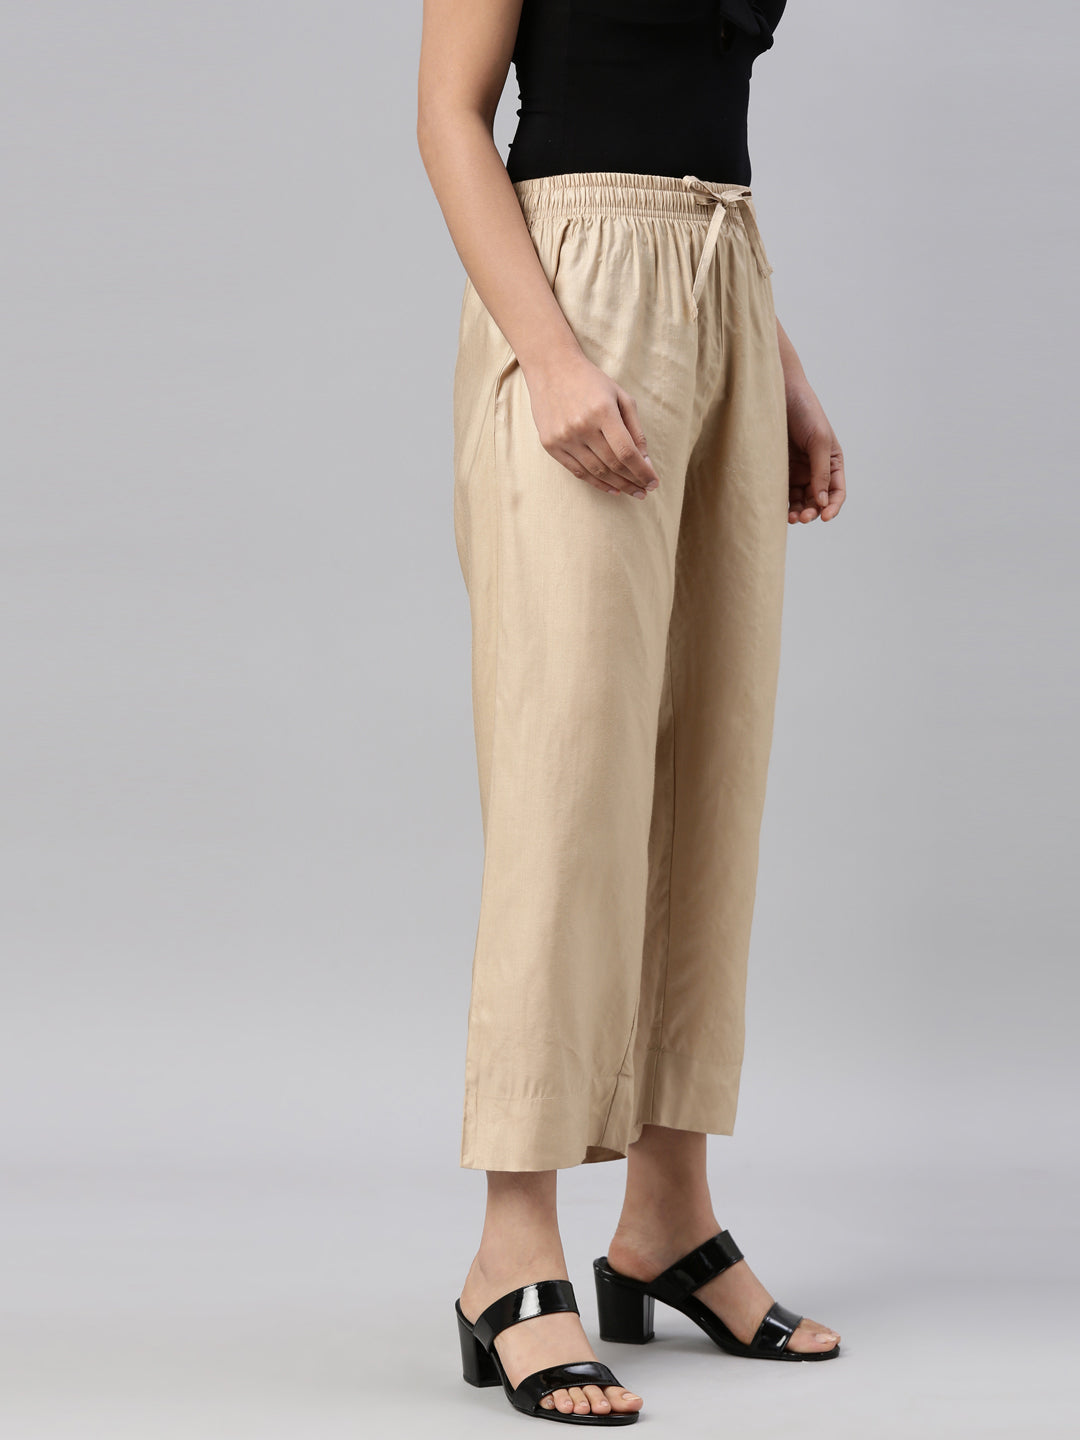 Buy online Golden Silk Trousers from bottom wear for Women by Numbrave for  1849 at 0 off  2023 Limeroadcom